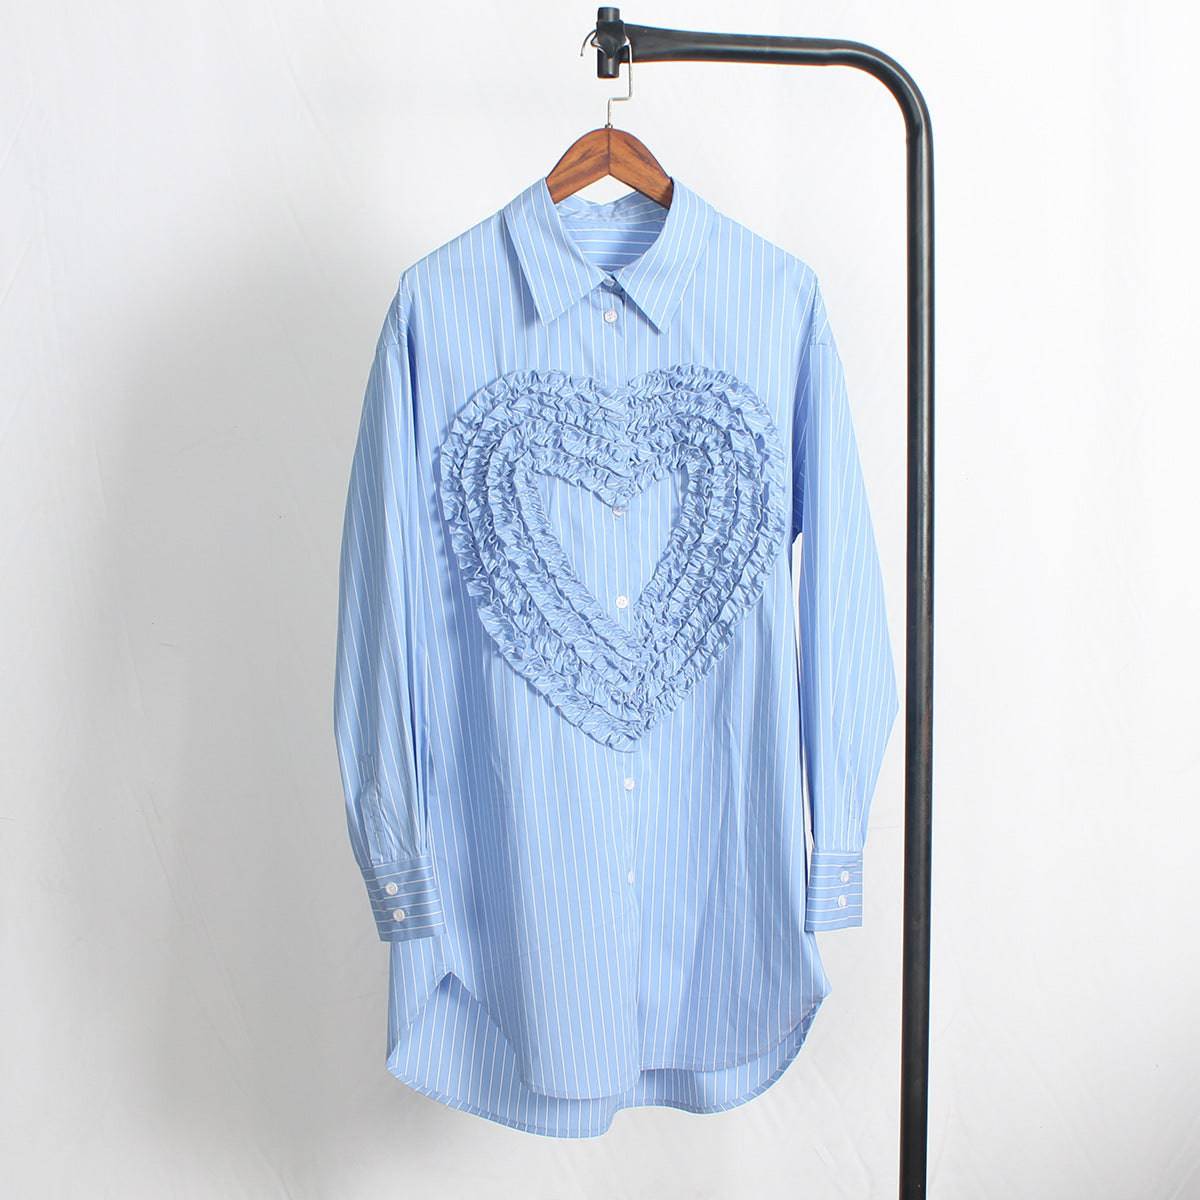 Micaela Stripped Ruffle Heart Embroidered Shirt Top - Hot fashionista